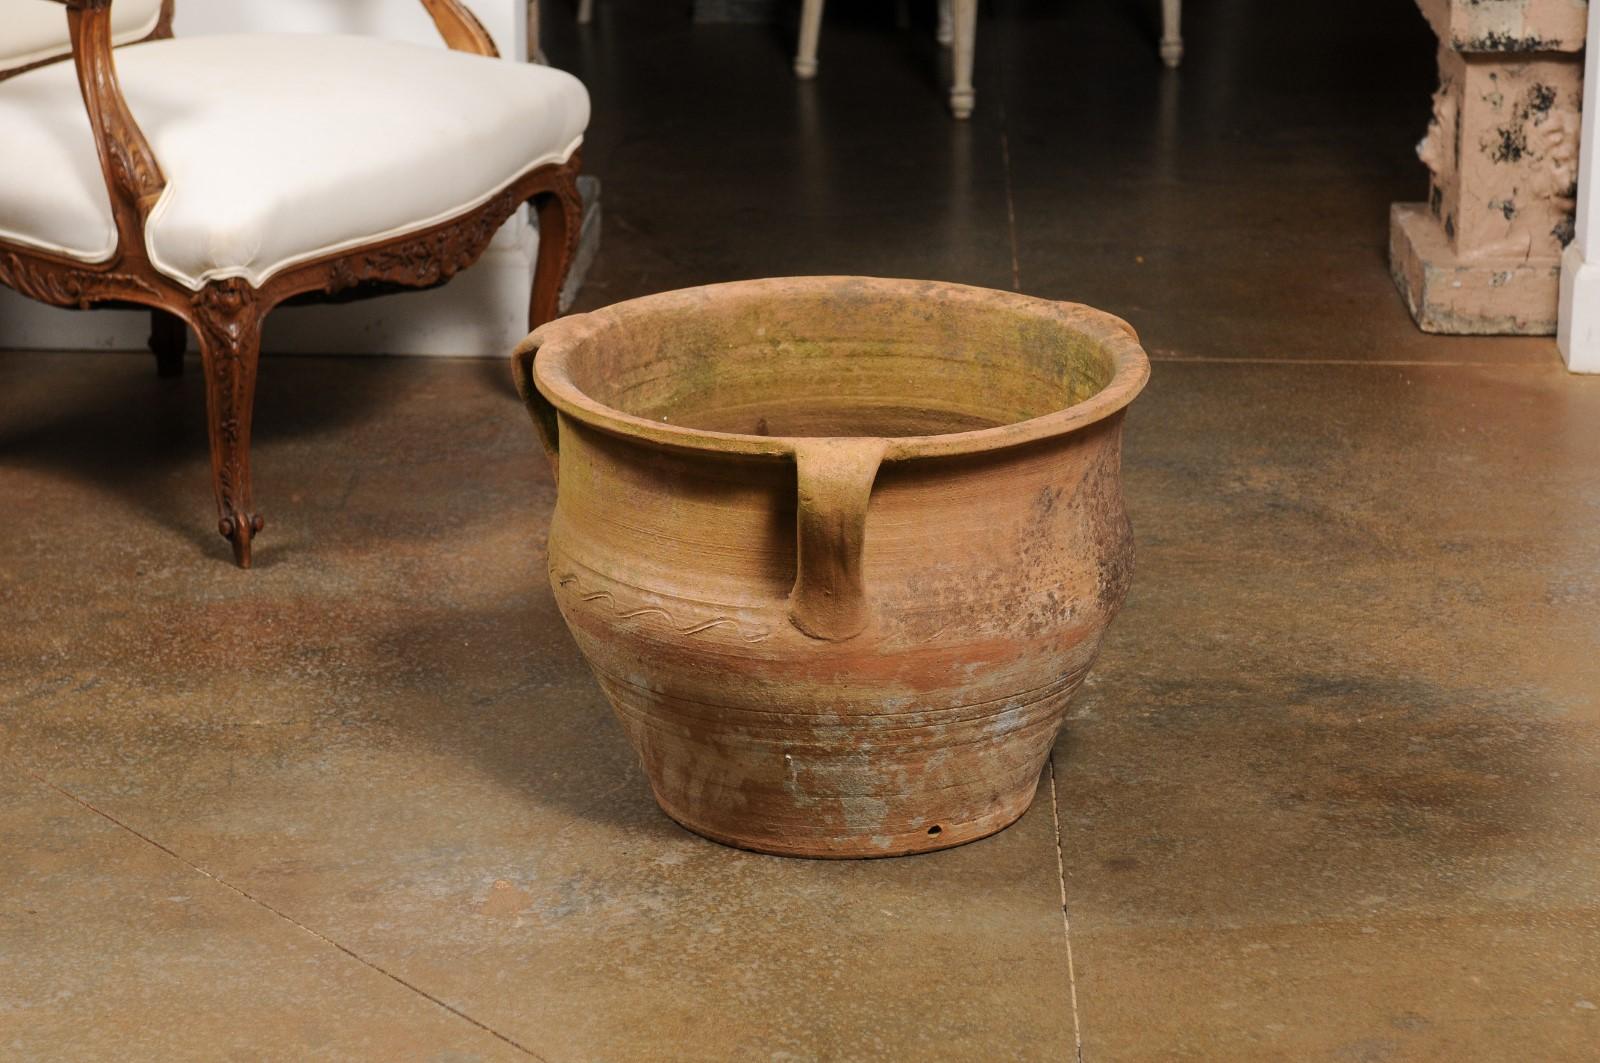 English Turn of the Century Terracotta Planter with Handles and Incised Waves 2